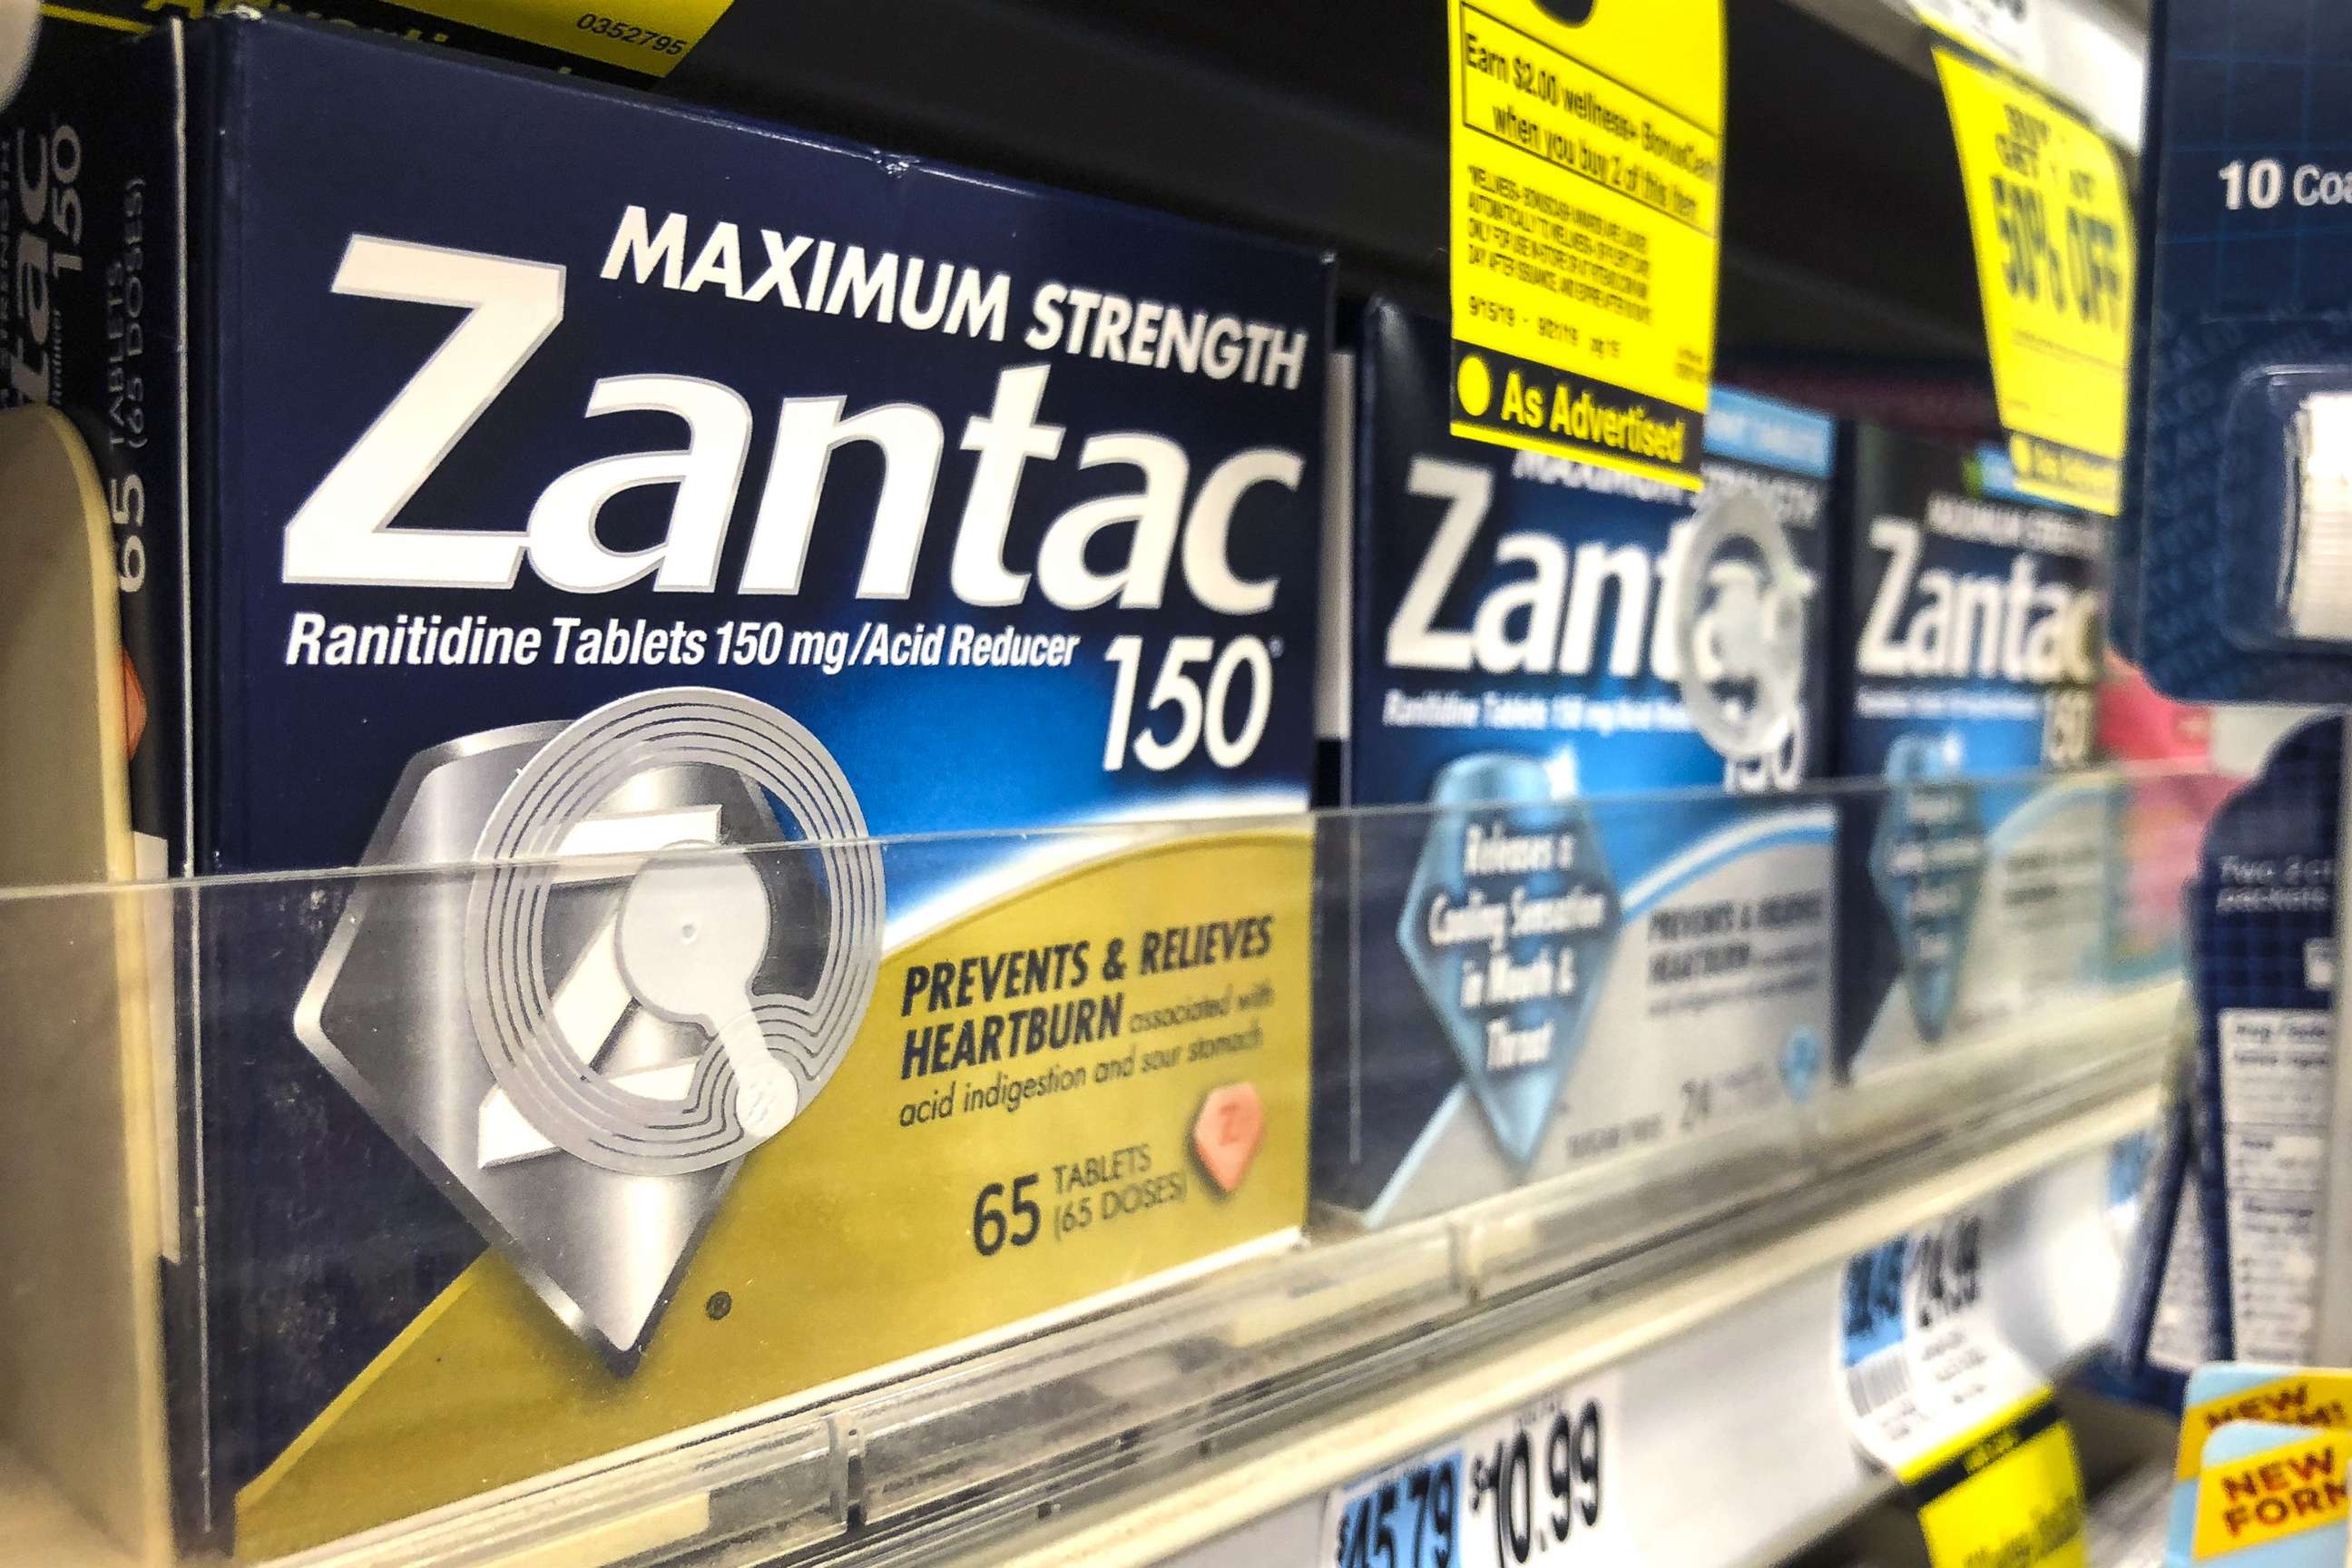 PHOTO: Packages of Zantac sit on a shelf at a drugstore, Sept. 19, 2019, in New York.